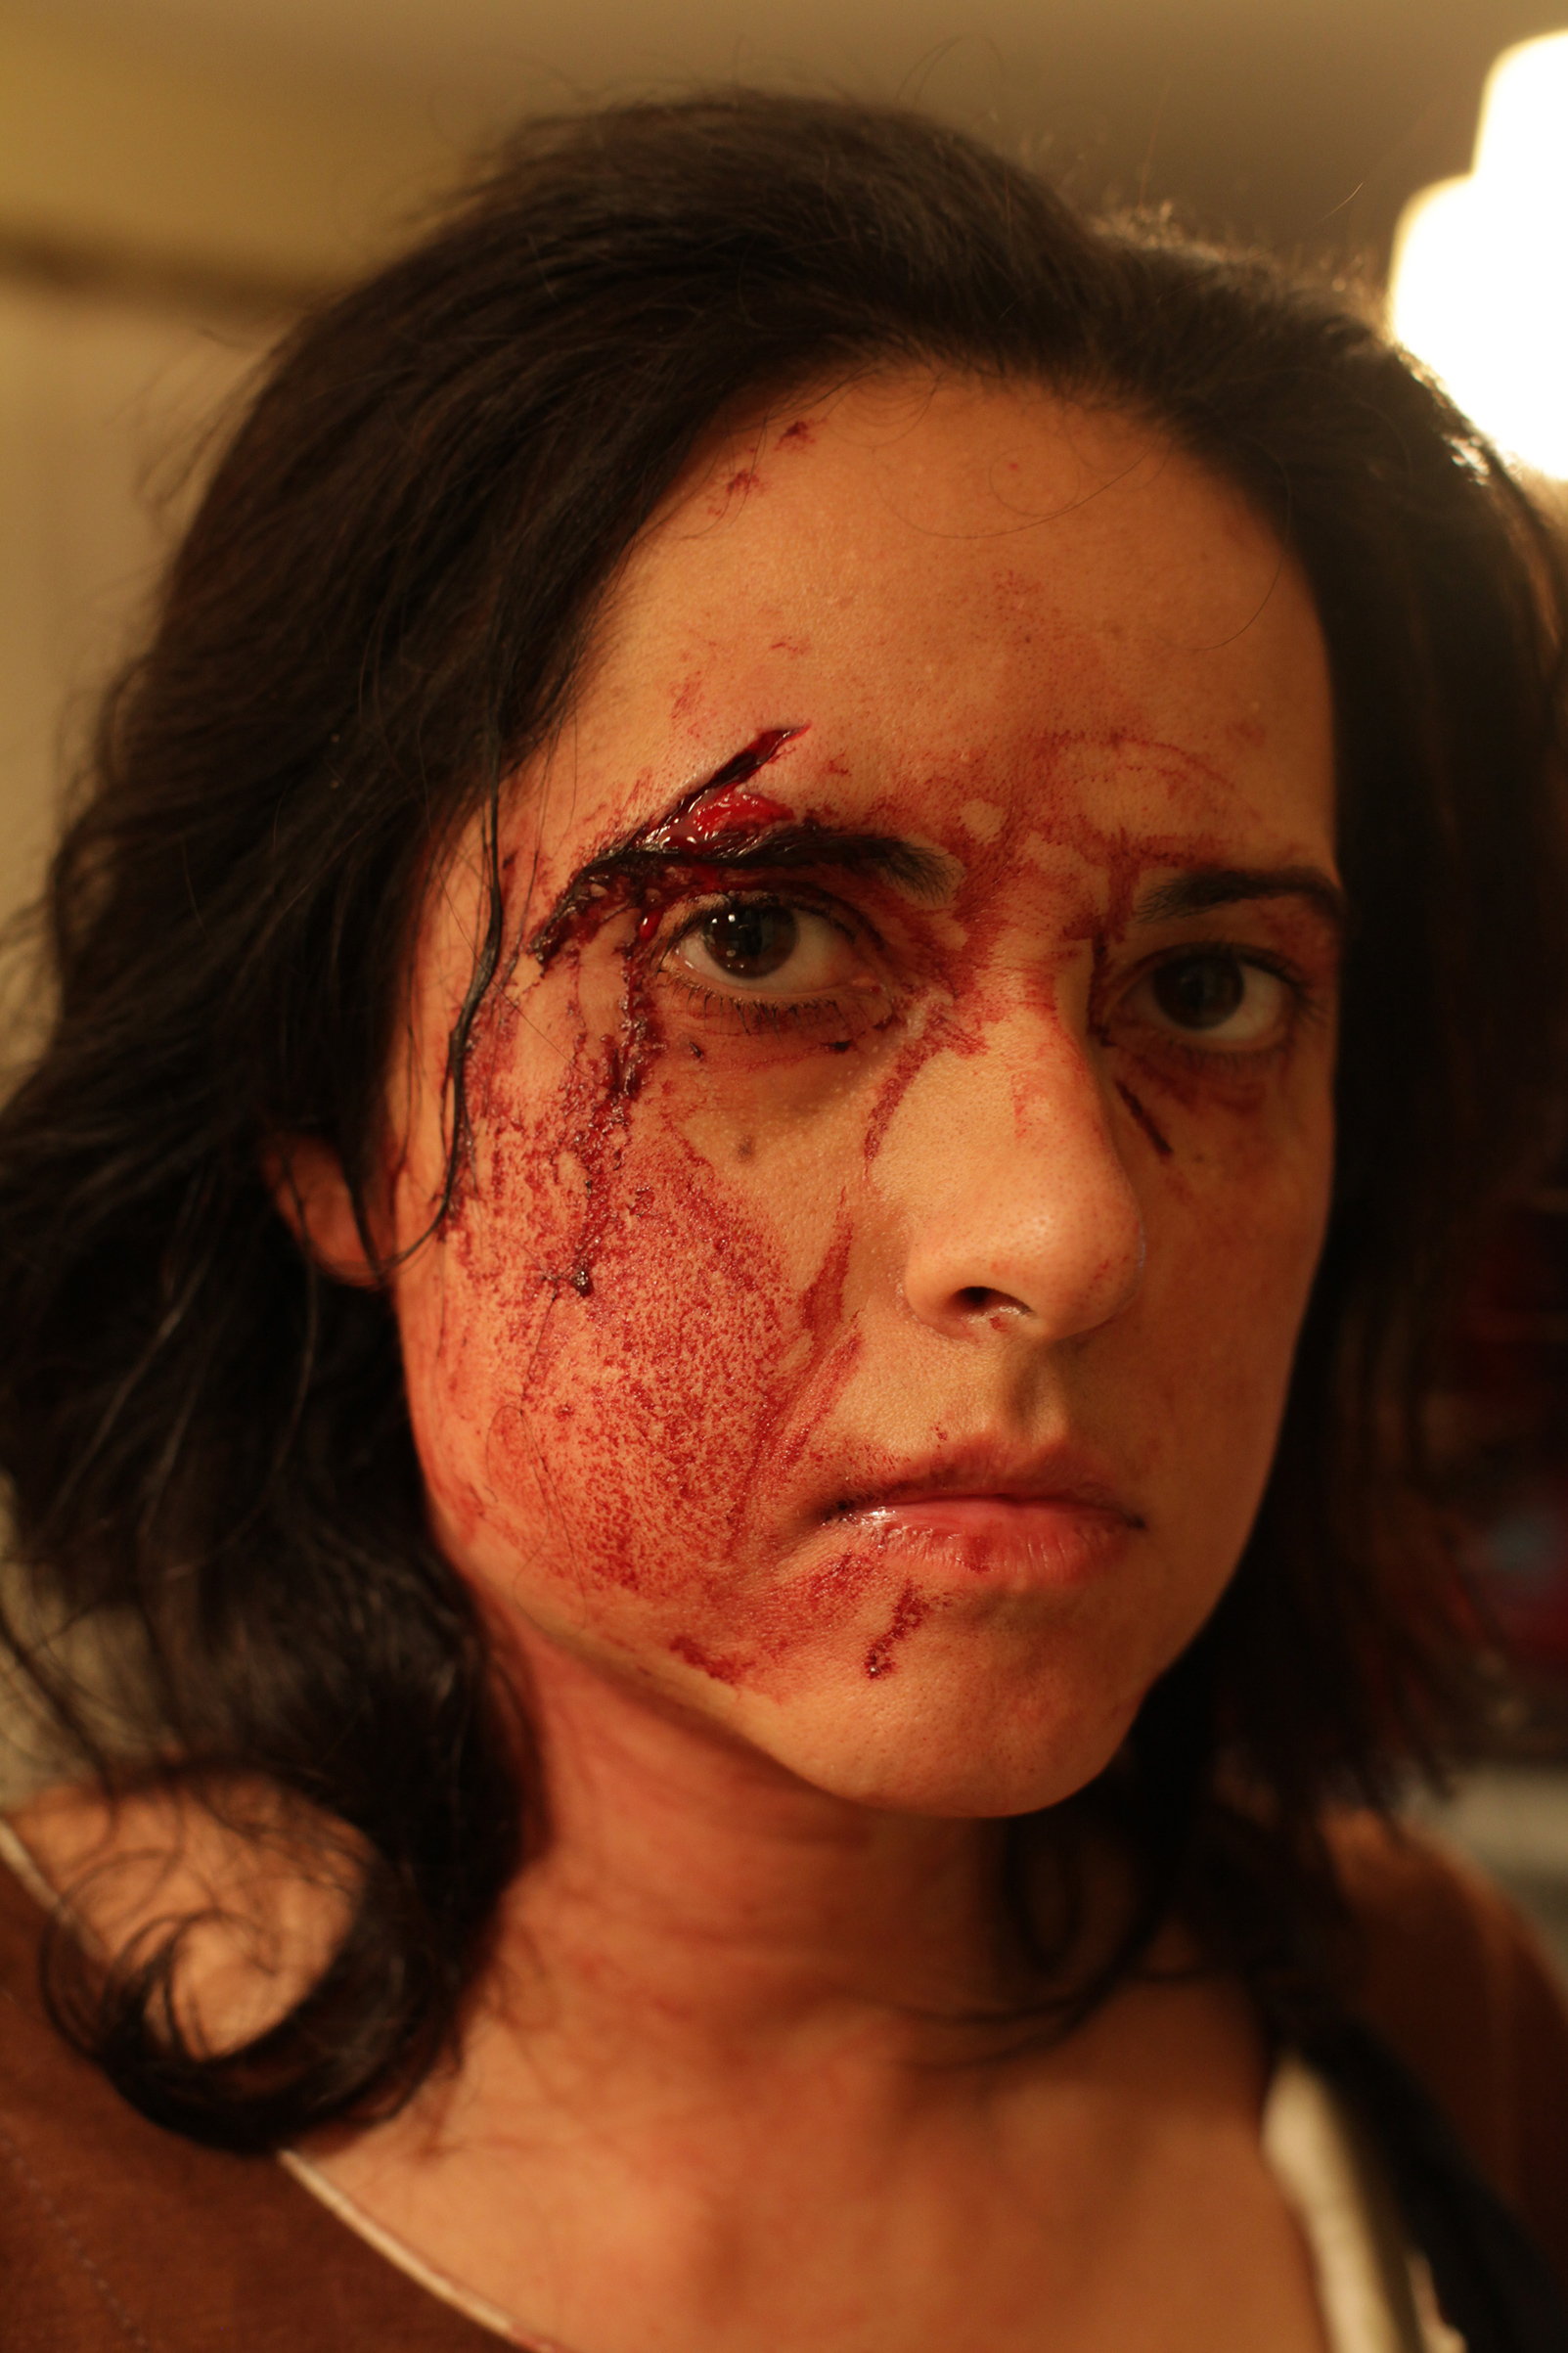 A self portrait by photojournalist Rena Effendi taken after an attack